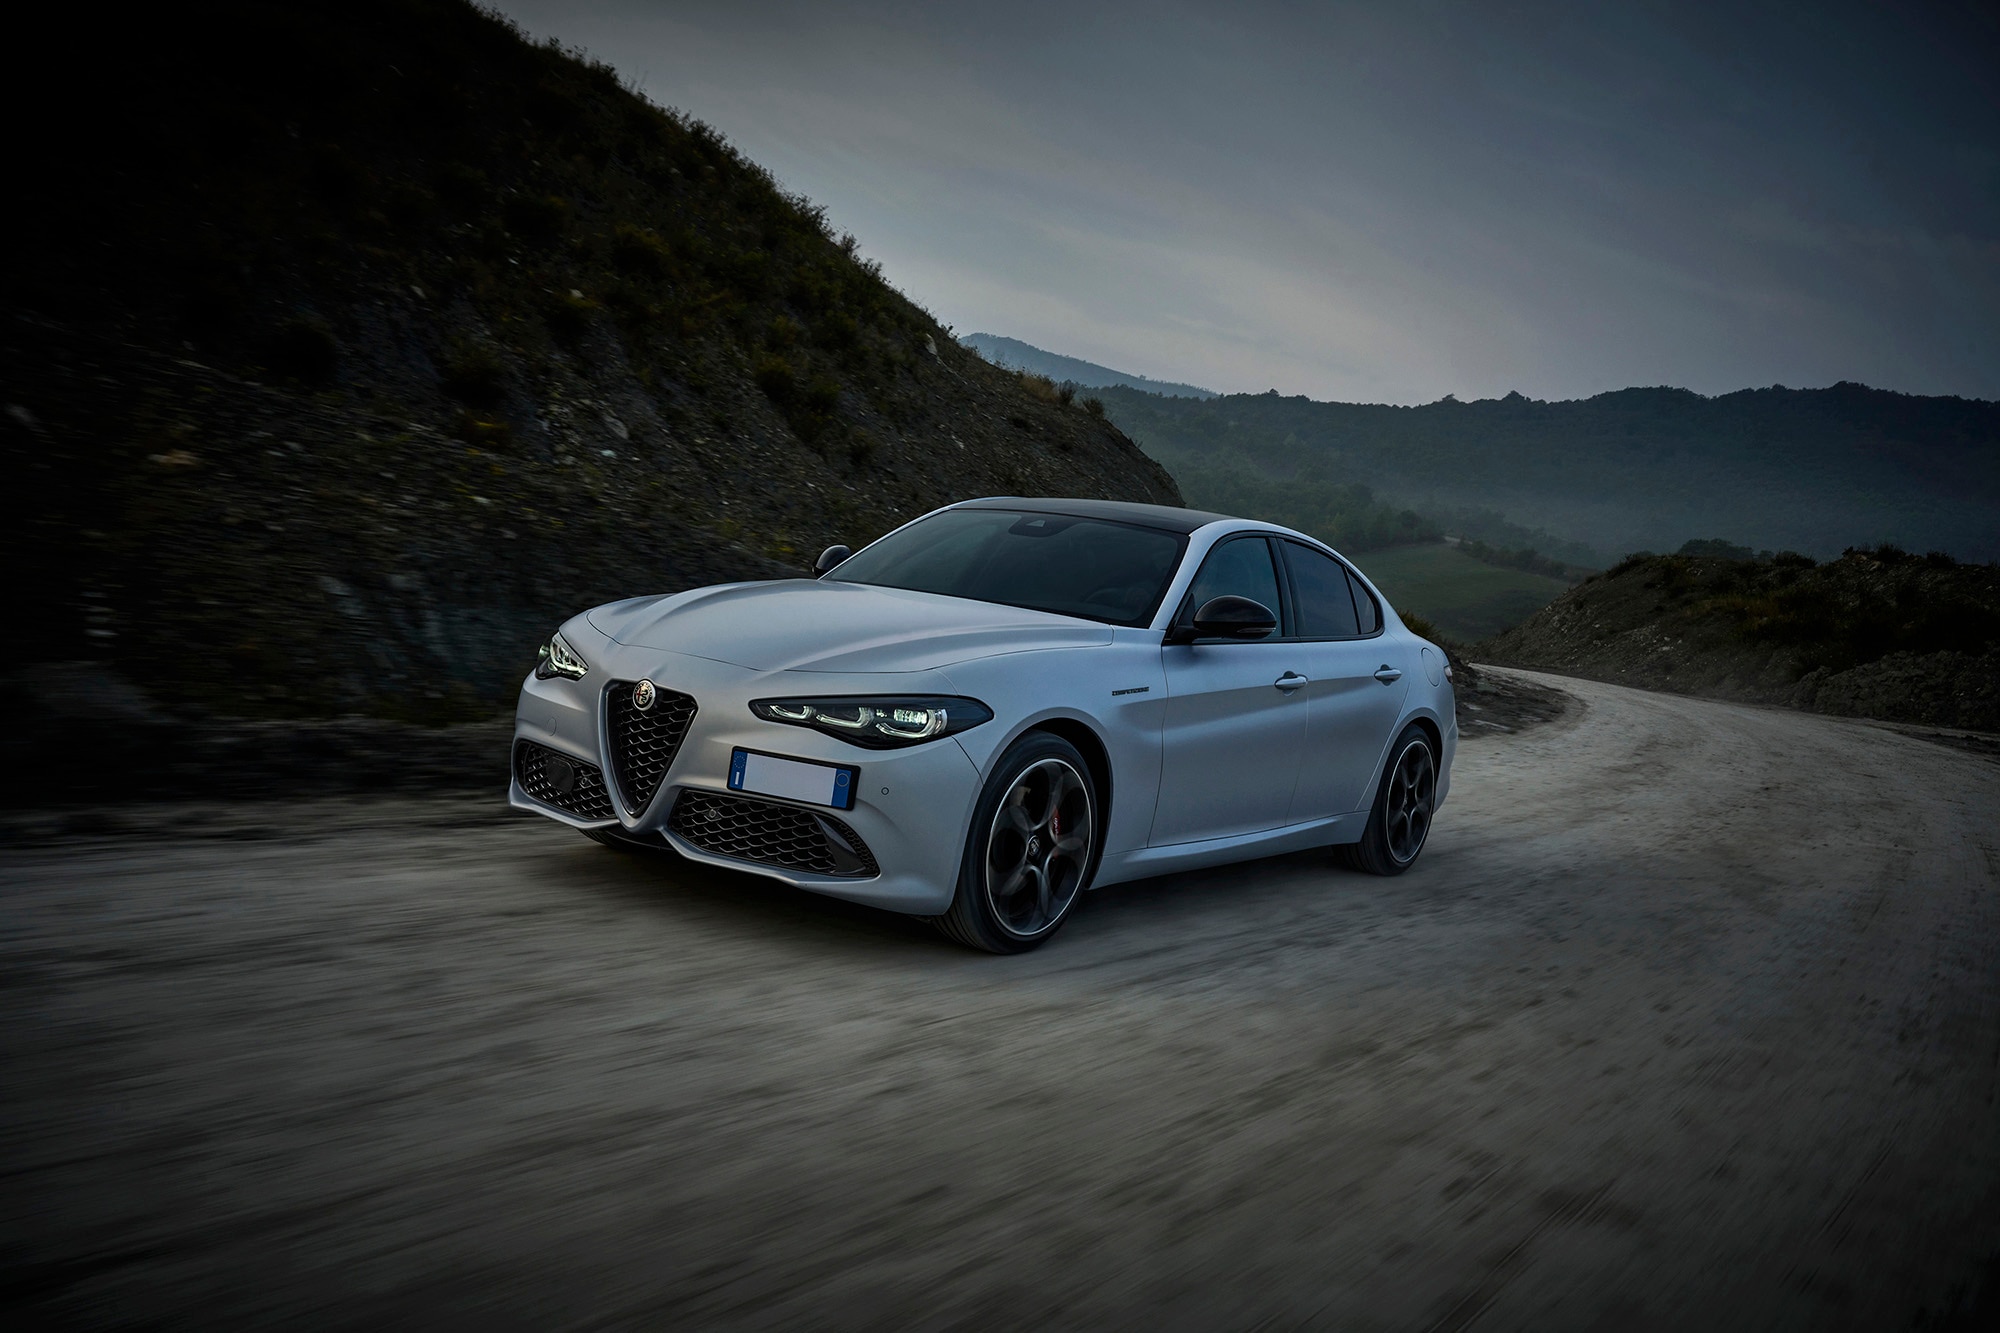 Alfa Romeo Giulia in silver matte paint driving up mountain road